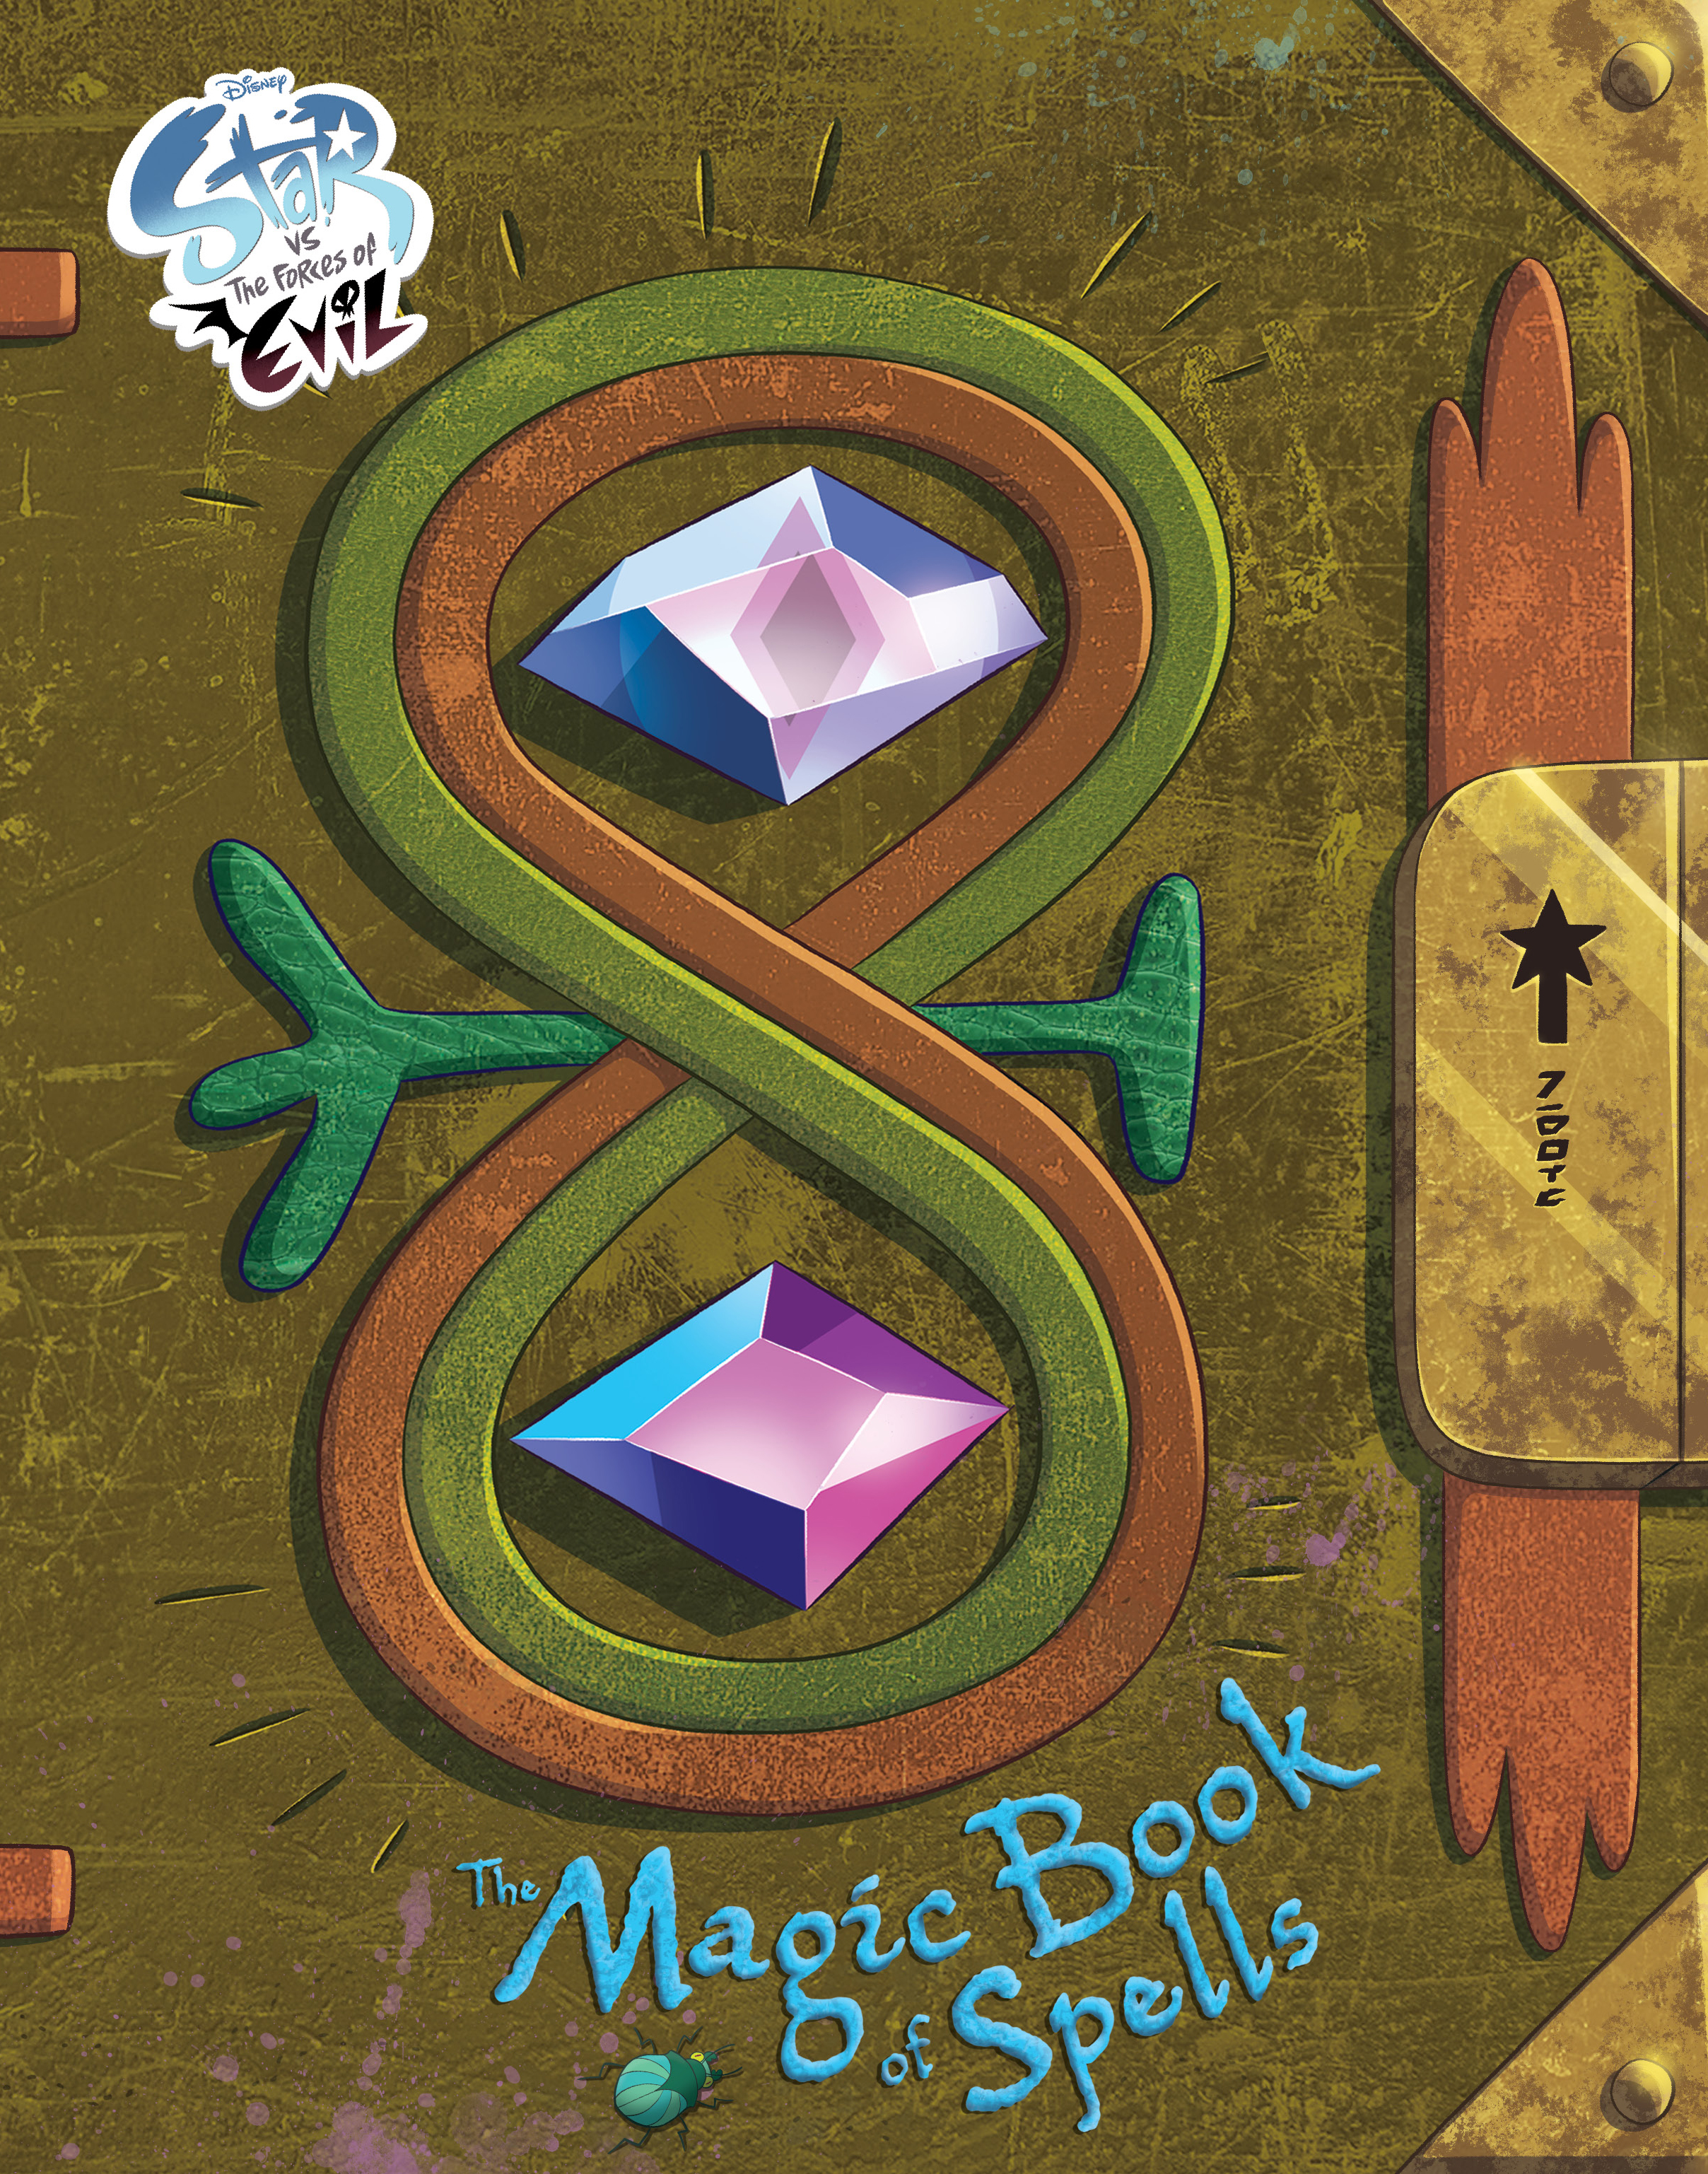 The Magic Book of Spells Star vs. the Forces of Evil by Amber